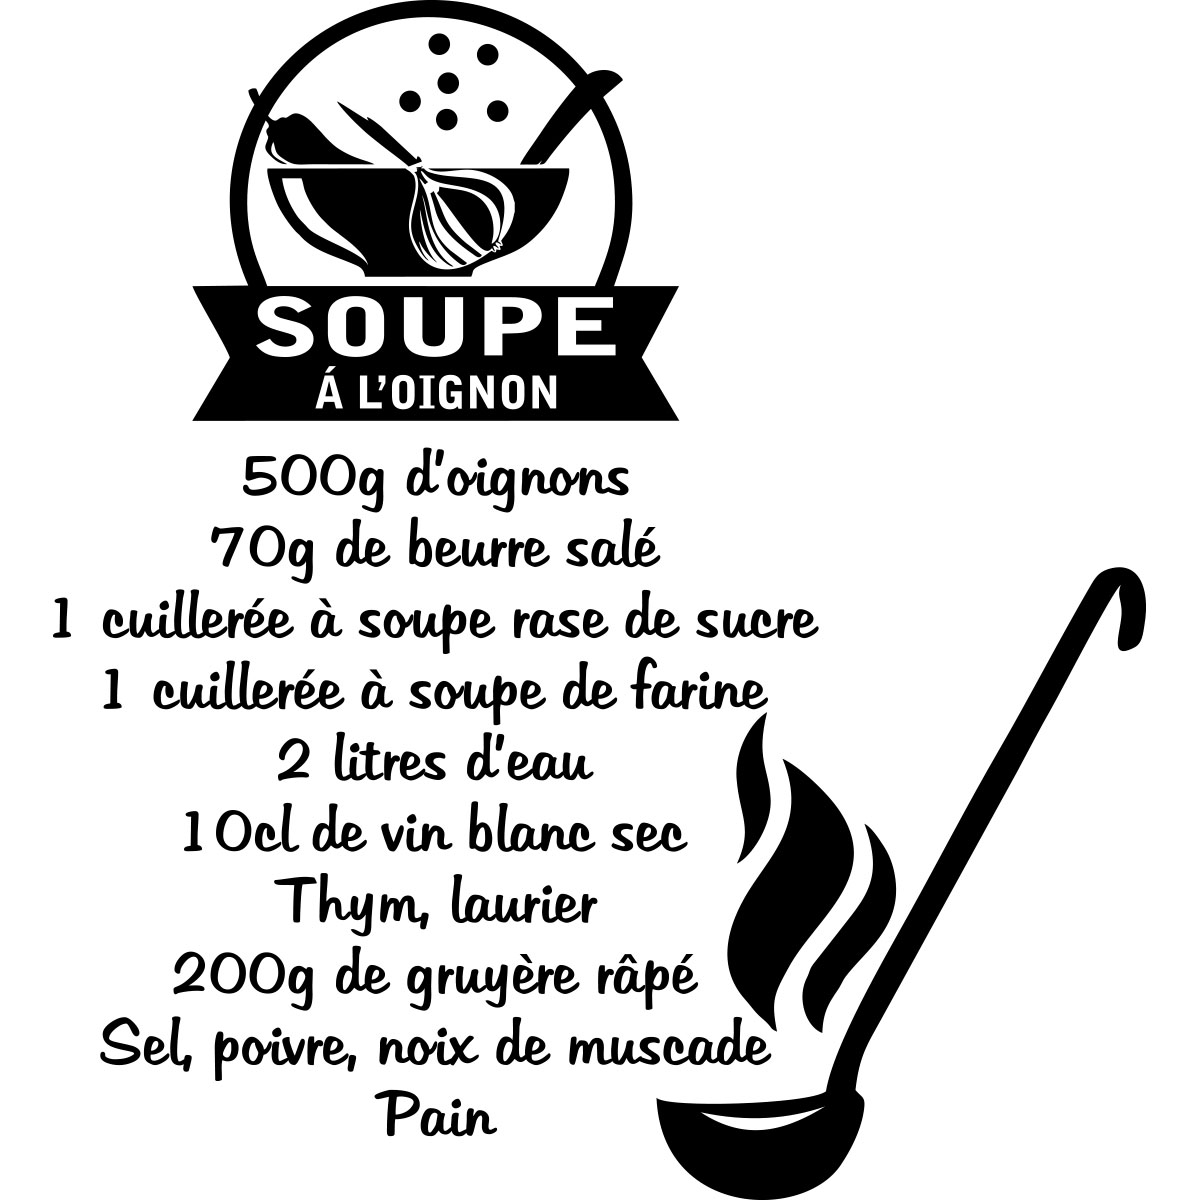 Wall Sticker Quote Recipe Soupe A L Oignon Decoration Wall Decals Quote Wall Stickers French Ambiance Sticker